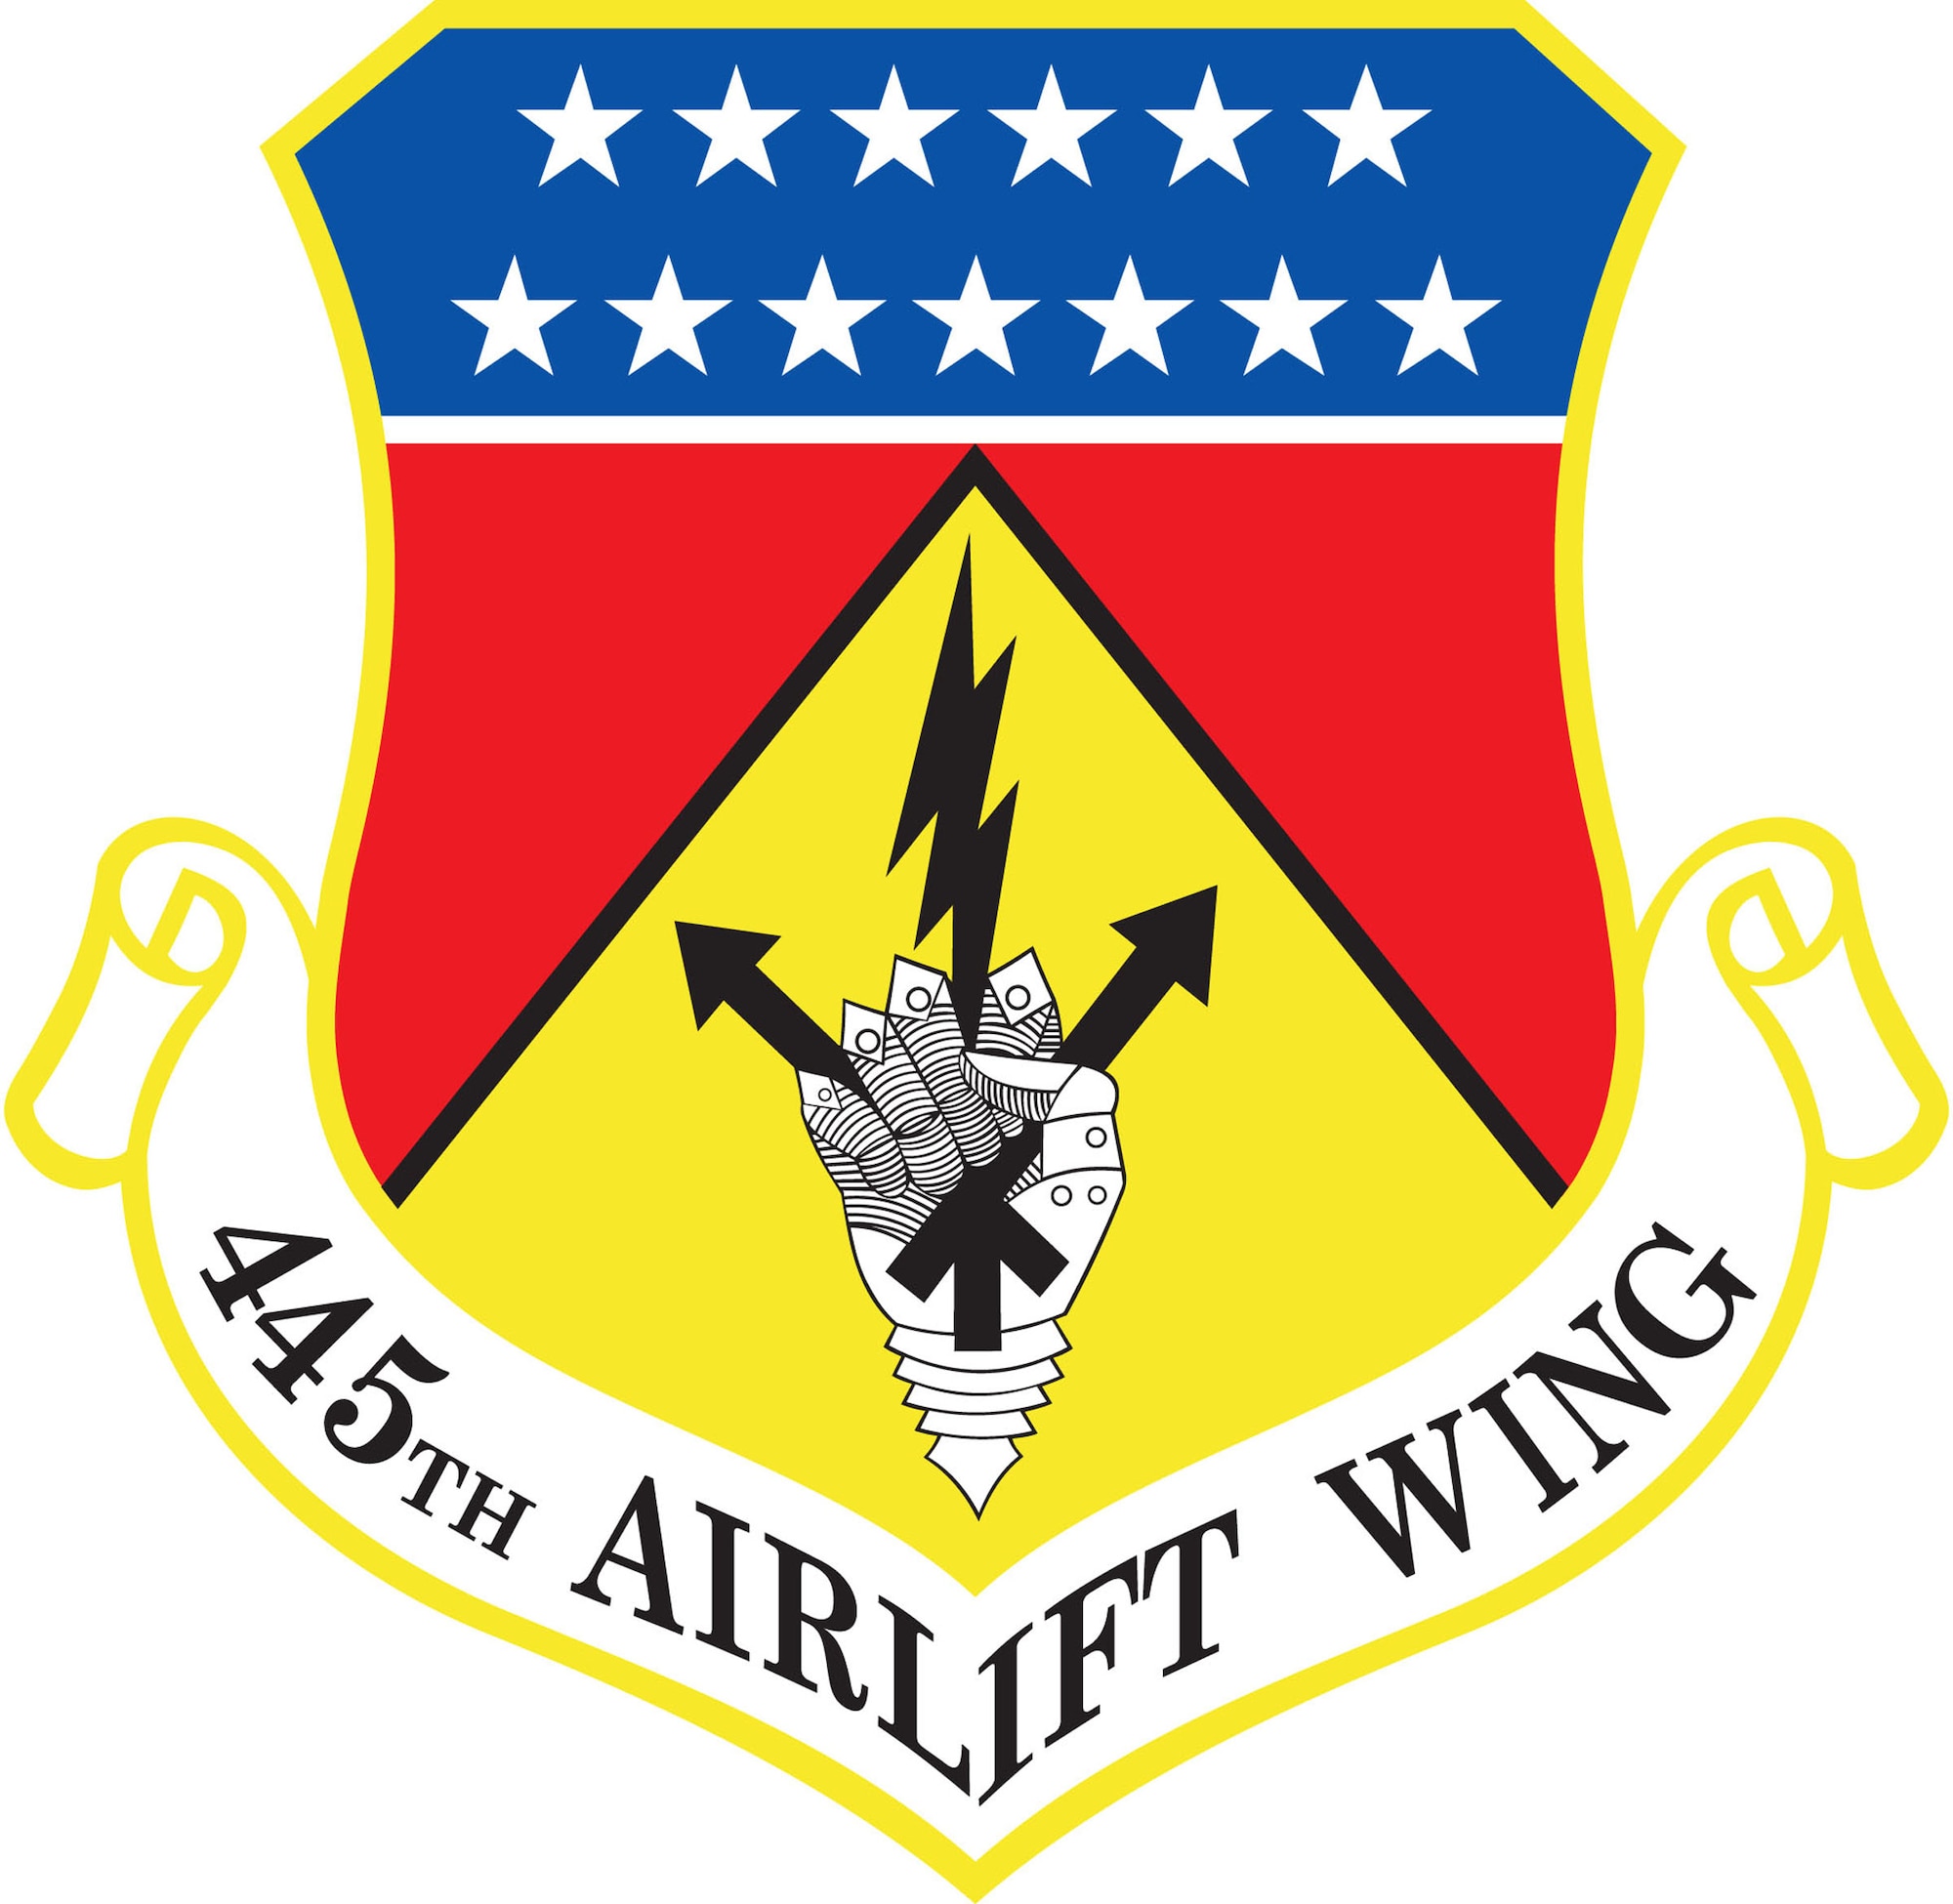 The Air Force has launched a redesign of its official websites, to include the website for the 445th Airlift Wing. To enable required updates, new content will not be released on https://www.445aw.afrc.af.mil/ Dec. 6-10 while the 445th migrates to a freshly designed, mobile-ready website. The site will still be accessible during this new content freeze.